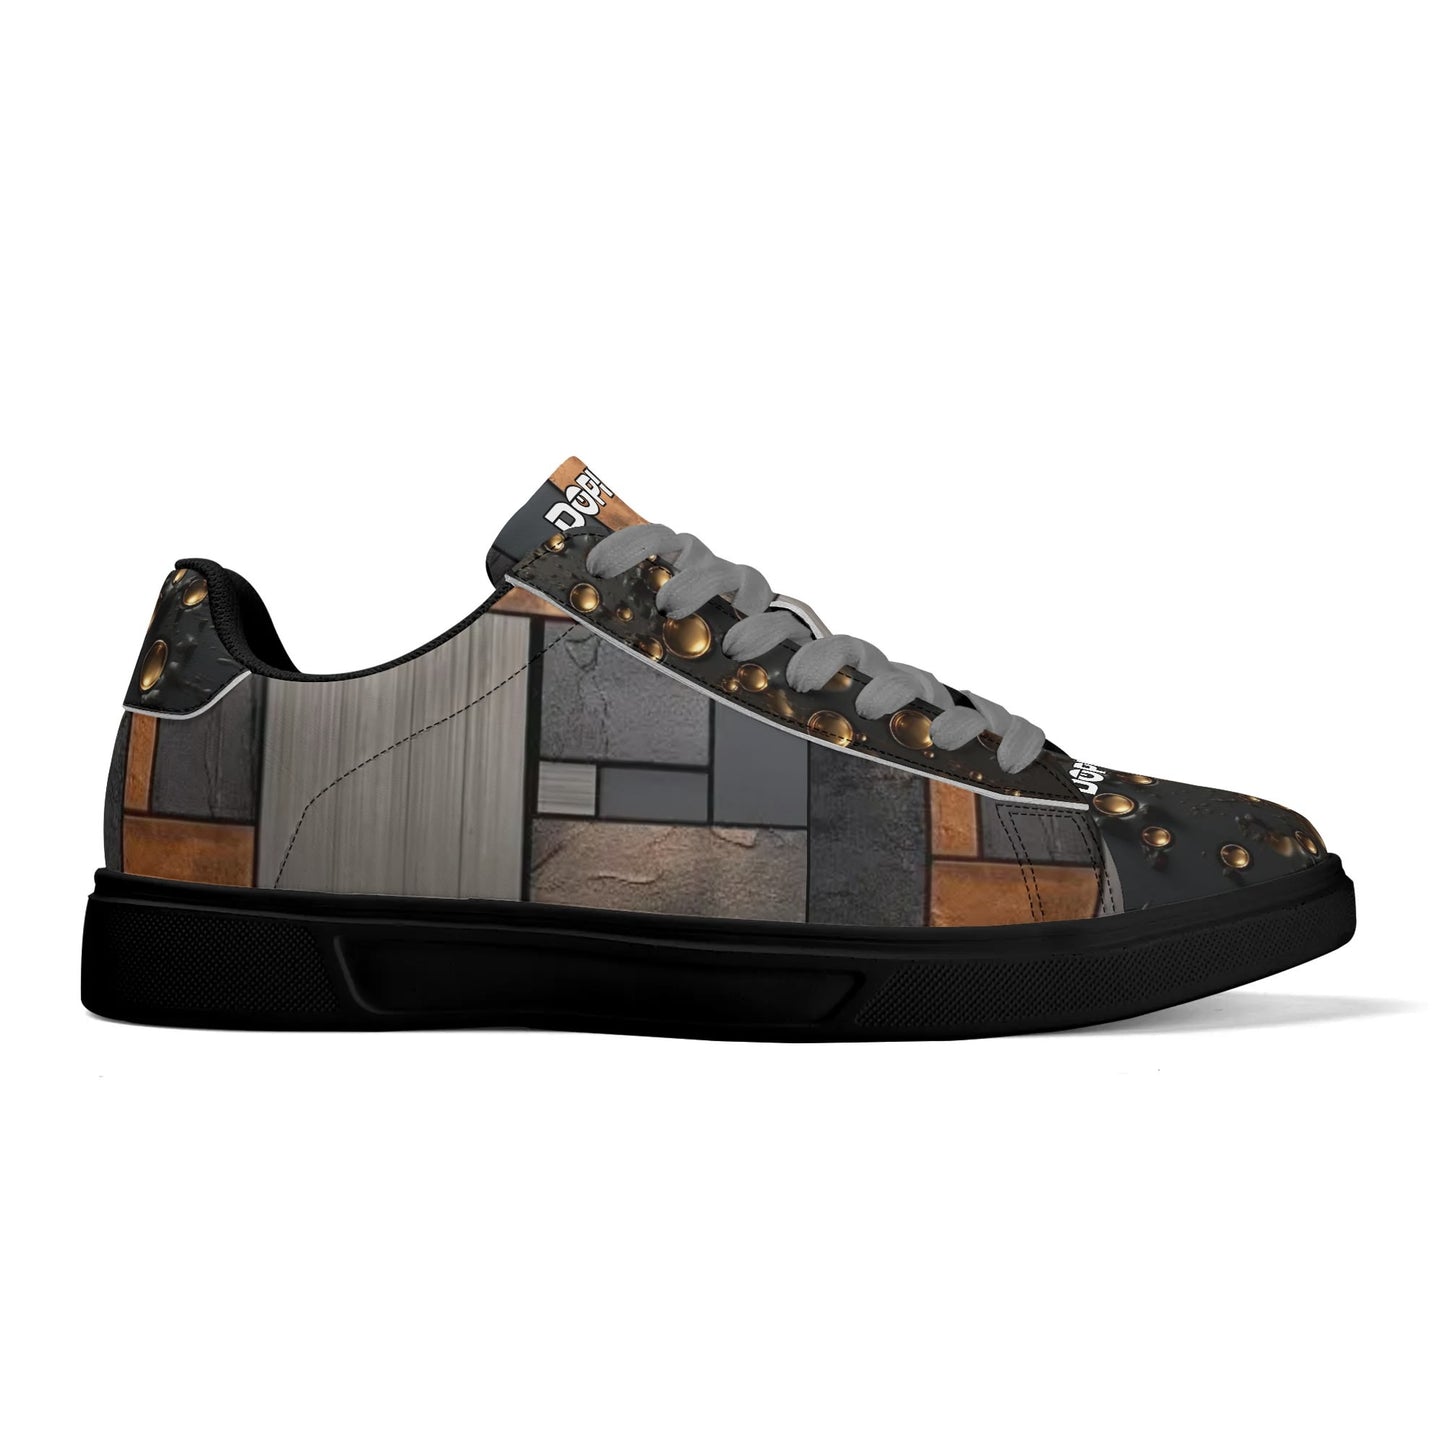 DOPiFiED ELement Geo  Lightweight Brand Low Top Leather Sneakers